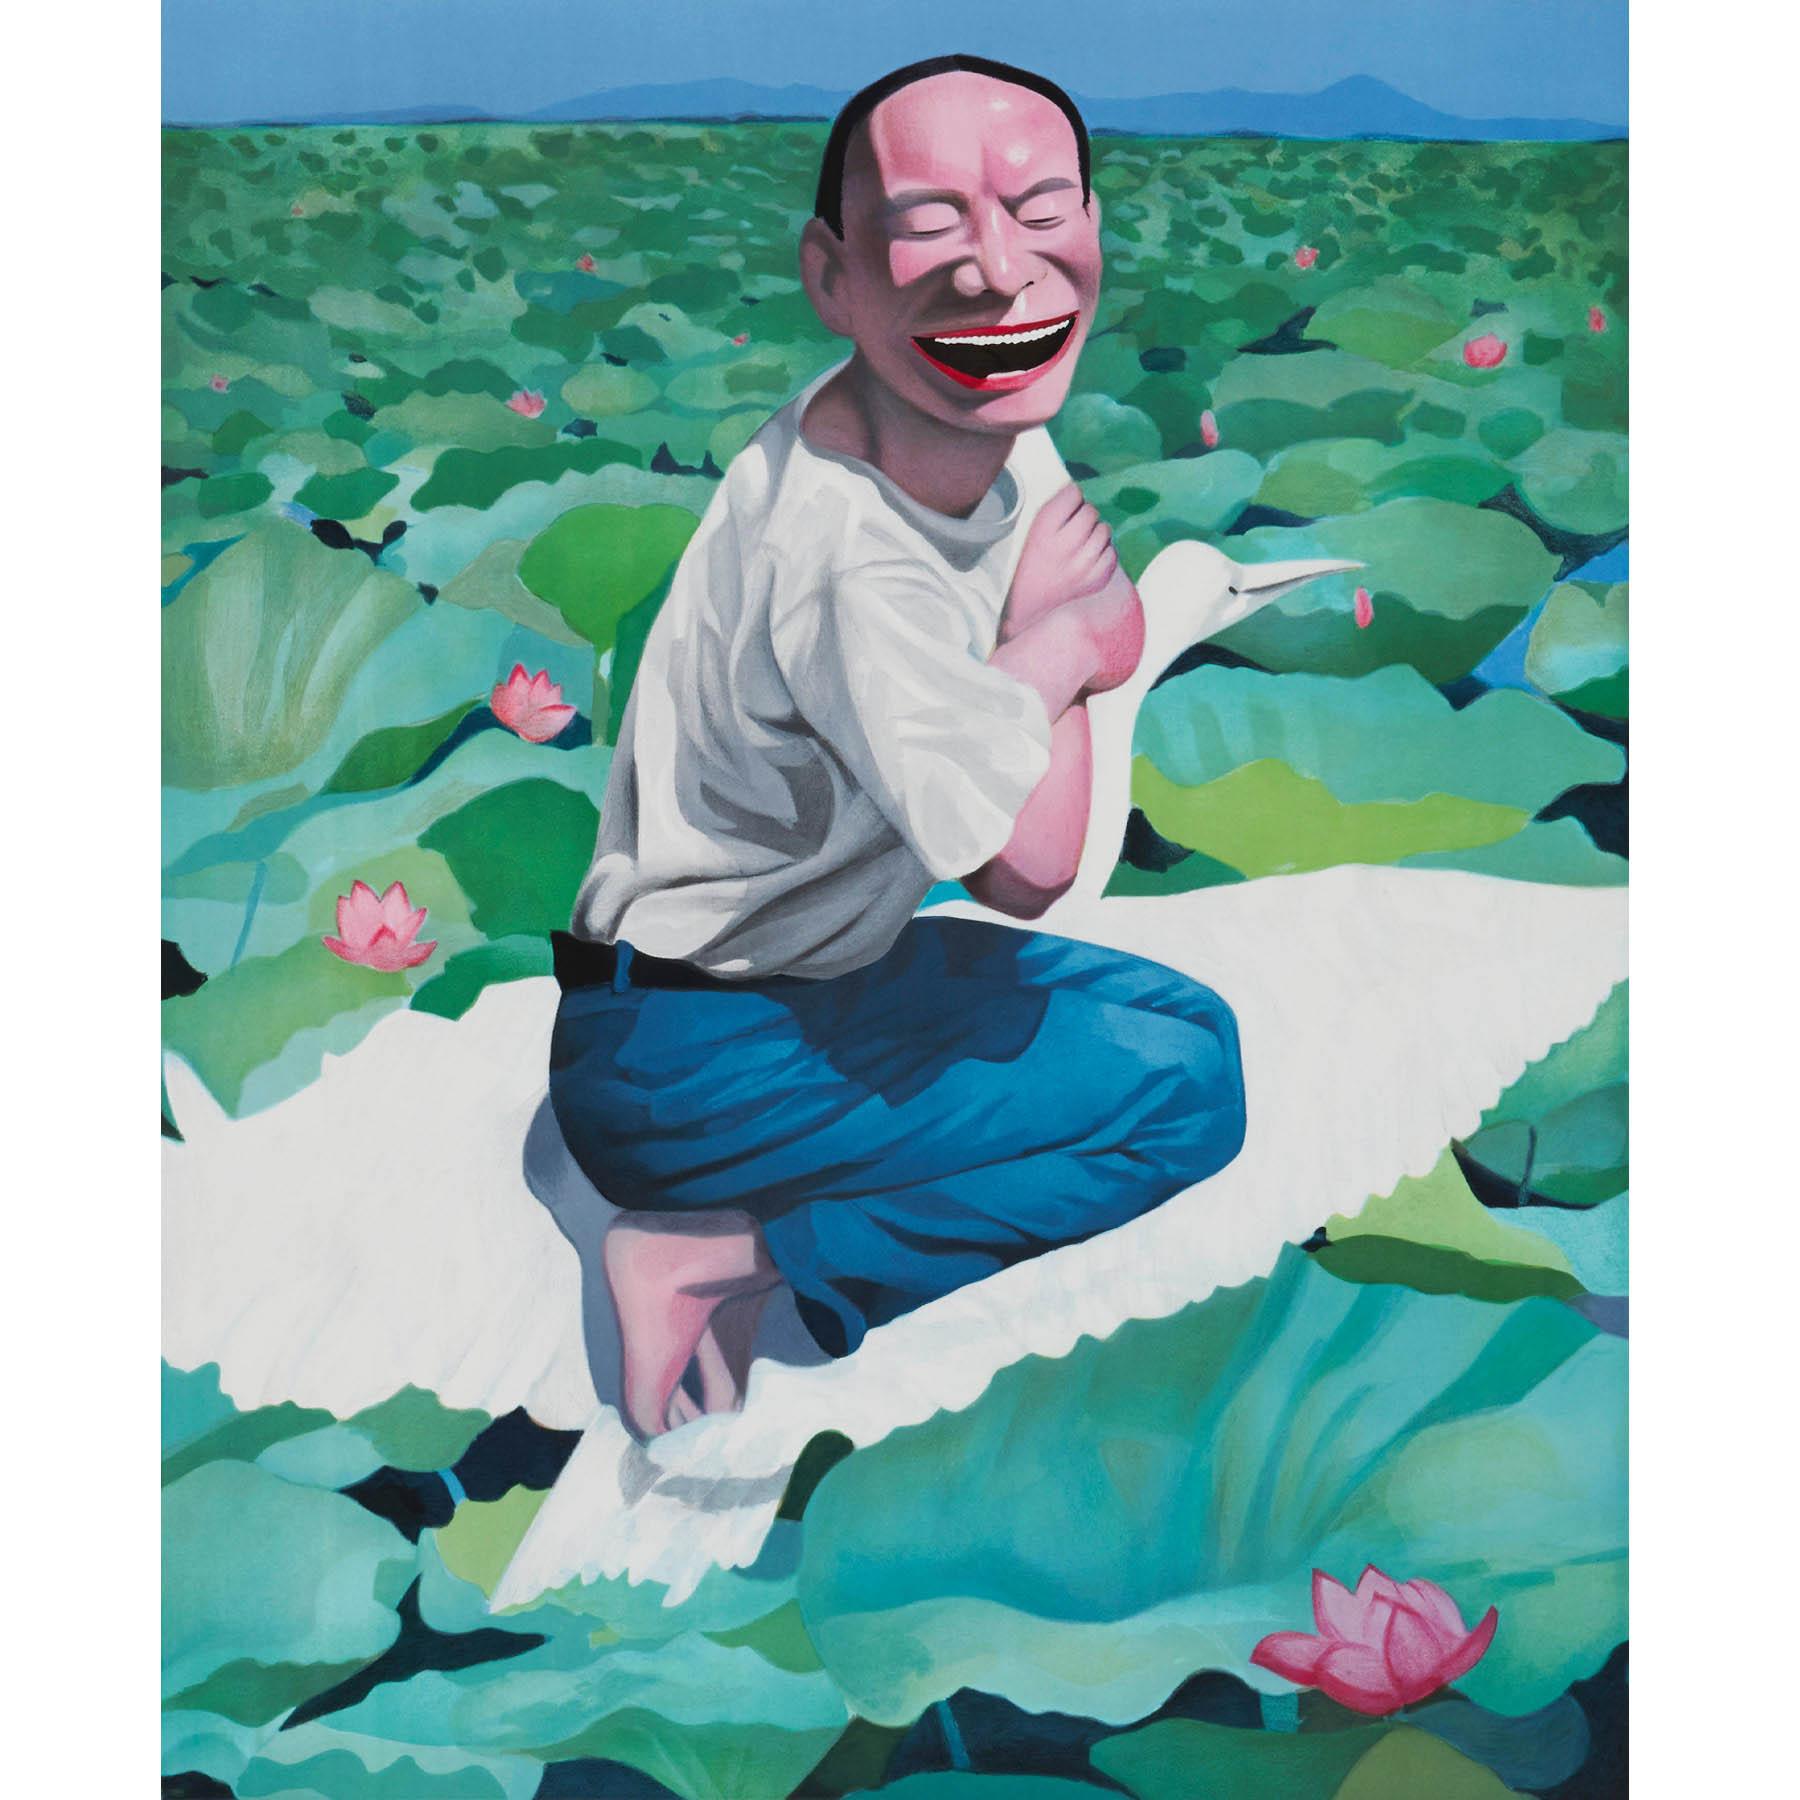 Lotus Pool - Contemporary, 21st Century, Lithograph, Limited Edition, Chinese - Print de Yue Minjun